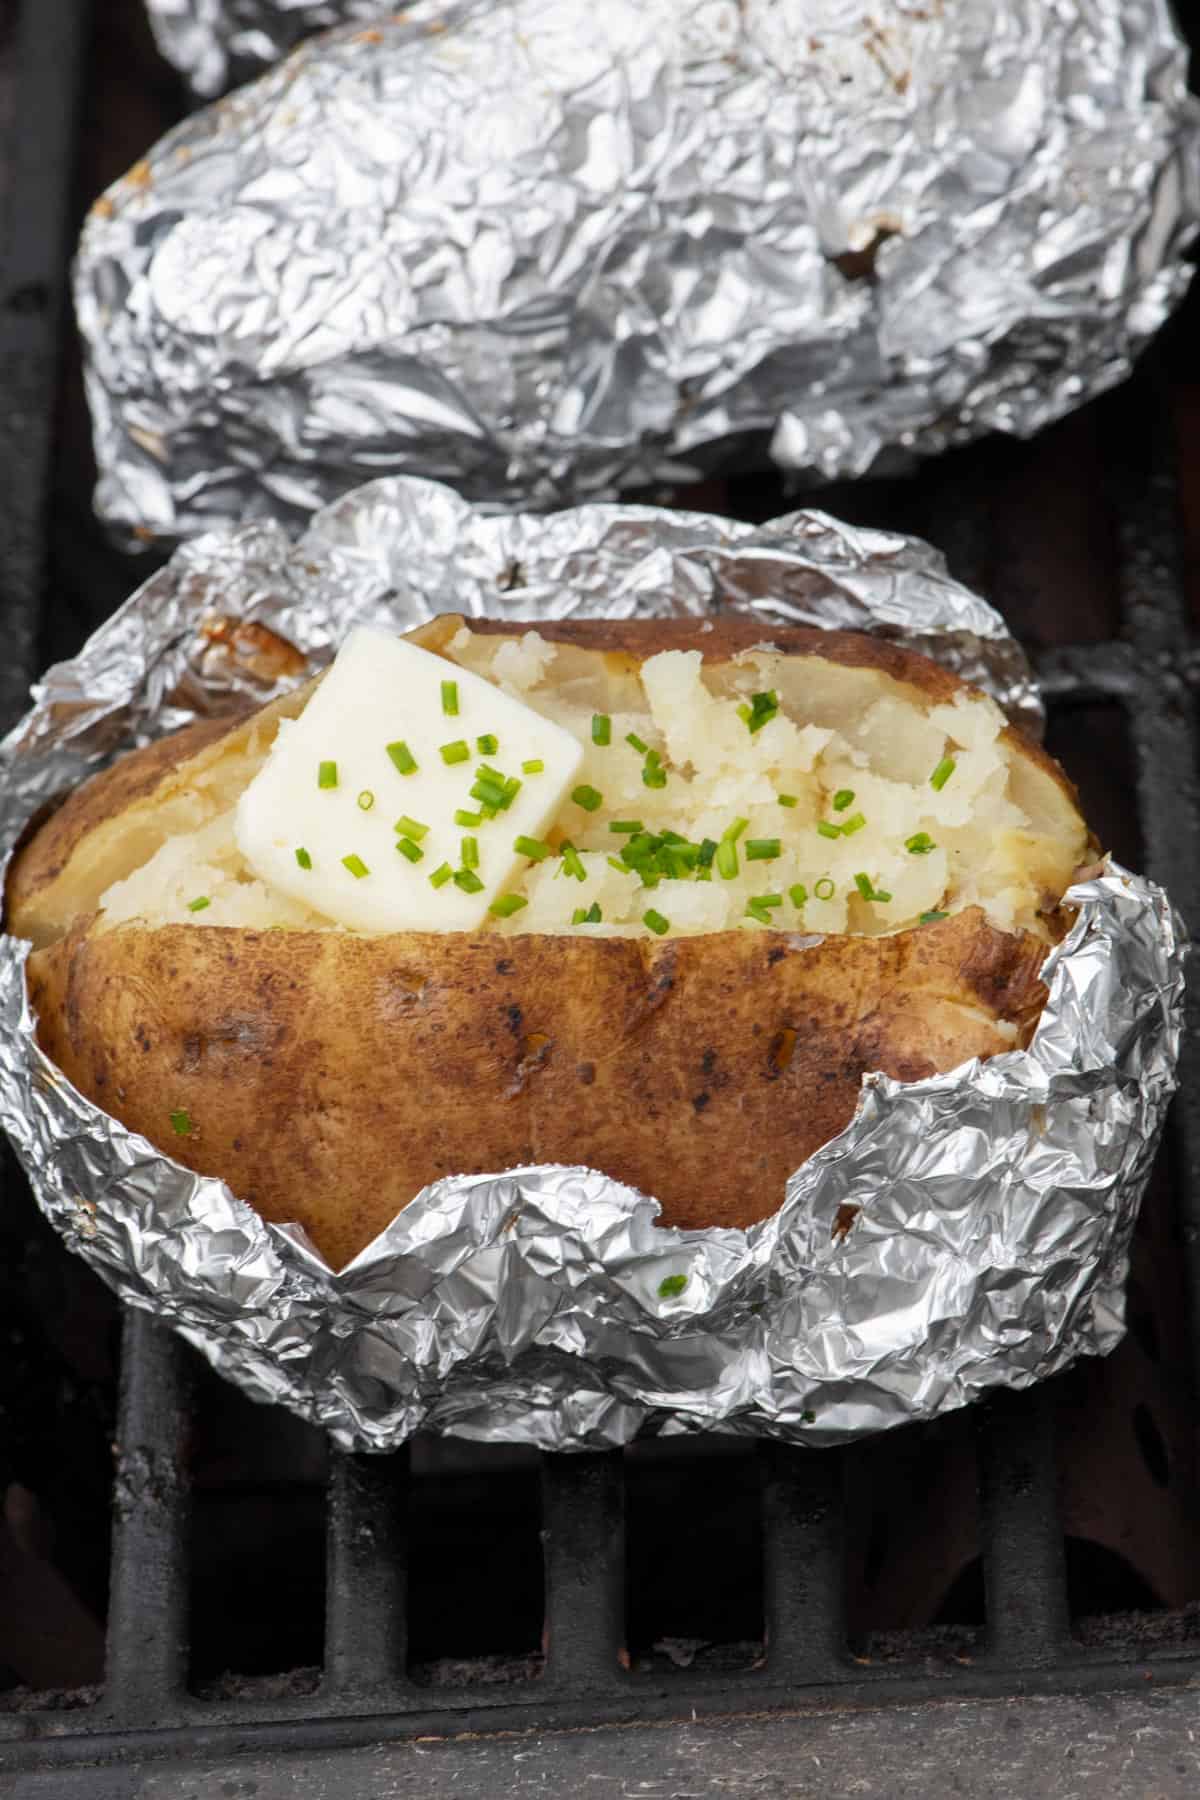 Foil wrapped baked on potatoes on the girll with one with the foil partially opened showing a split potato with butter and green onions.